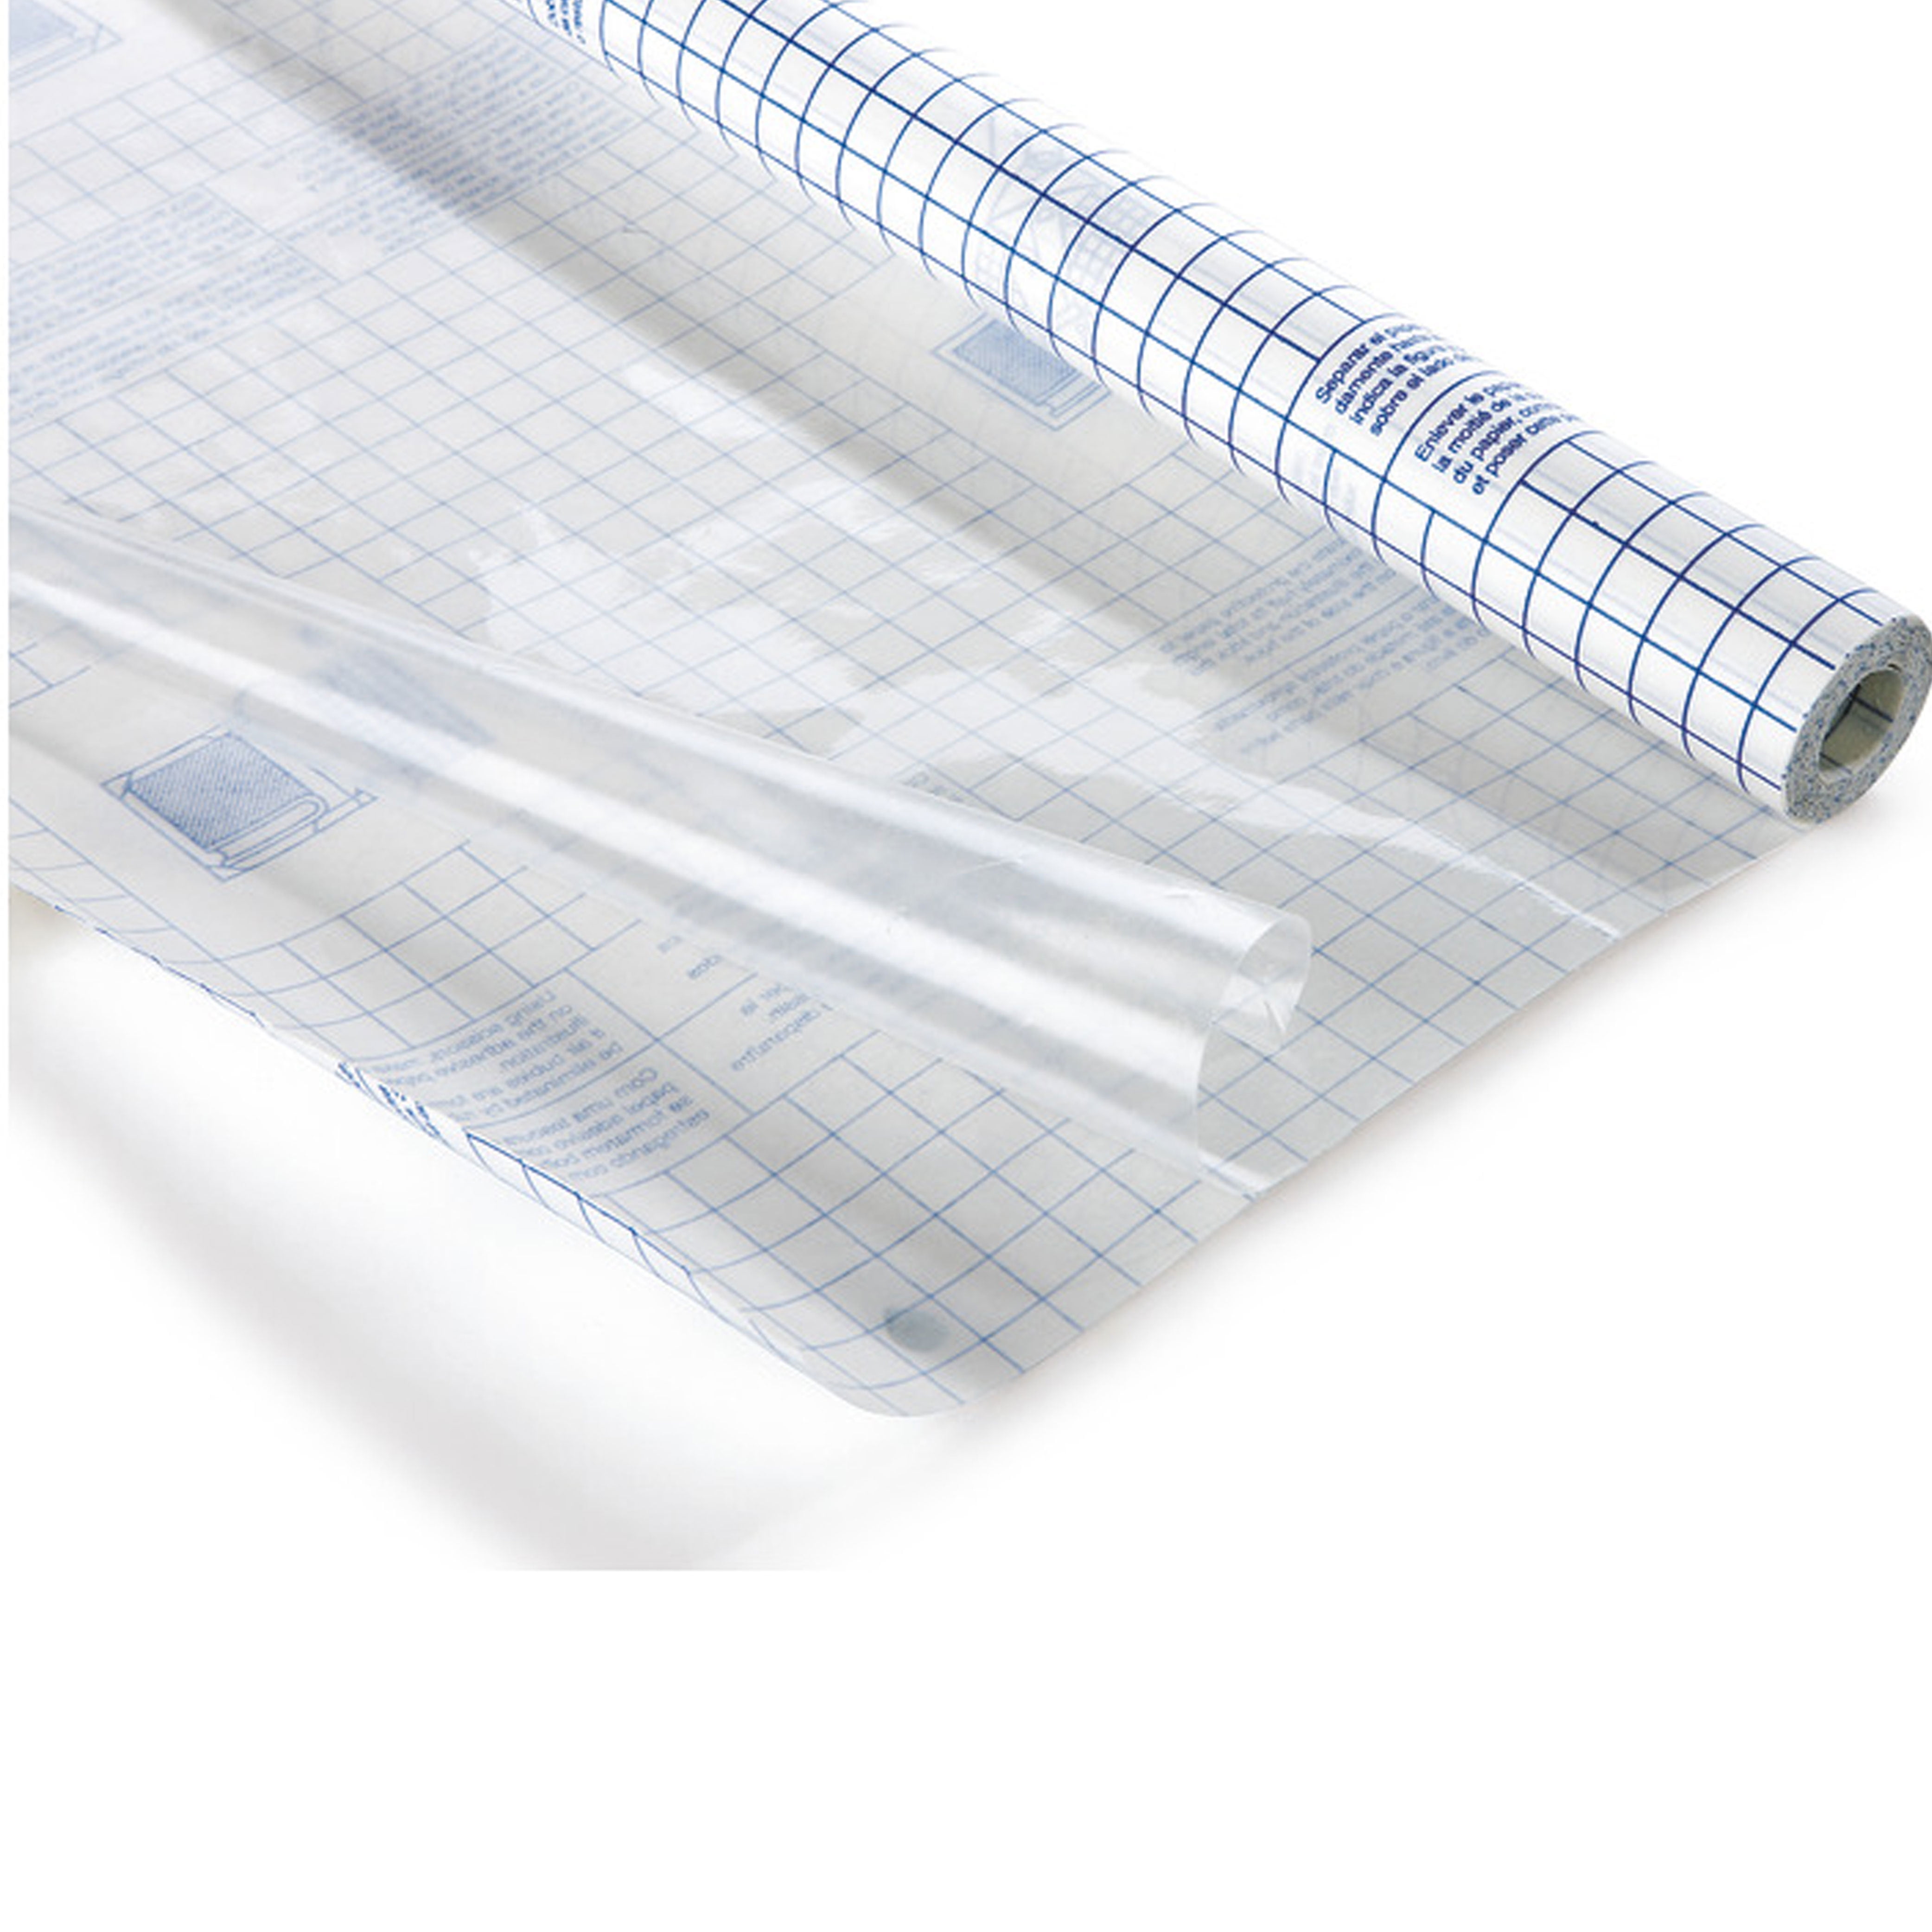  Clear Contact Paper Peel and Stick 17.7'' x 10ft Self Adhesive  Shelf Liner Contact Paper Waterproof Clear Glossy Self Adhesive Film  Covering Removable Protective Film Clear Contact Paper